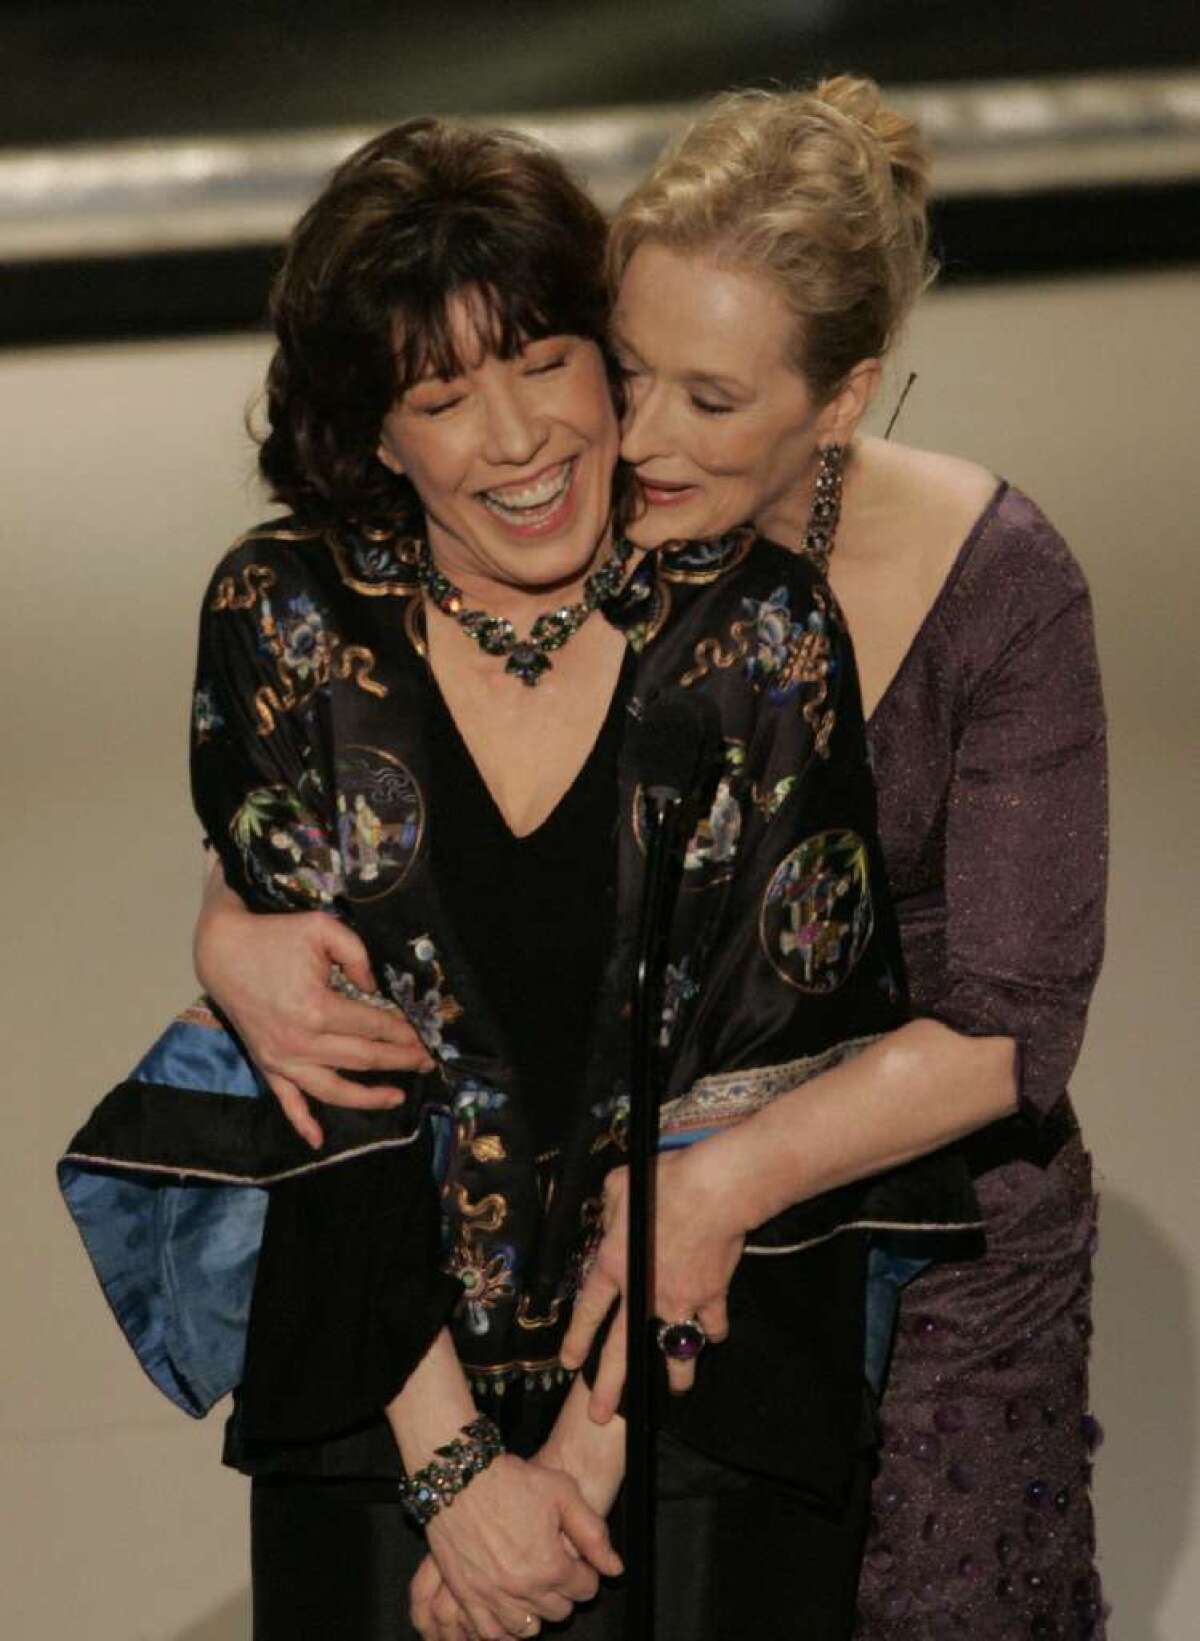 Streep, right, presenting with Lily Tomlin at the Academy Awards in 2006.